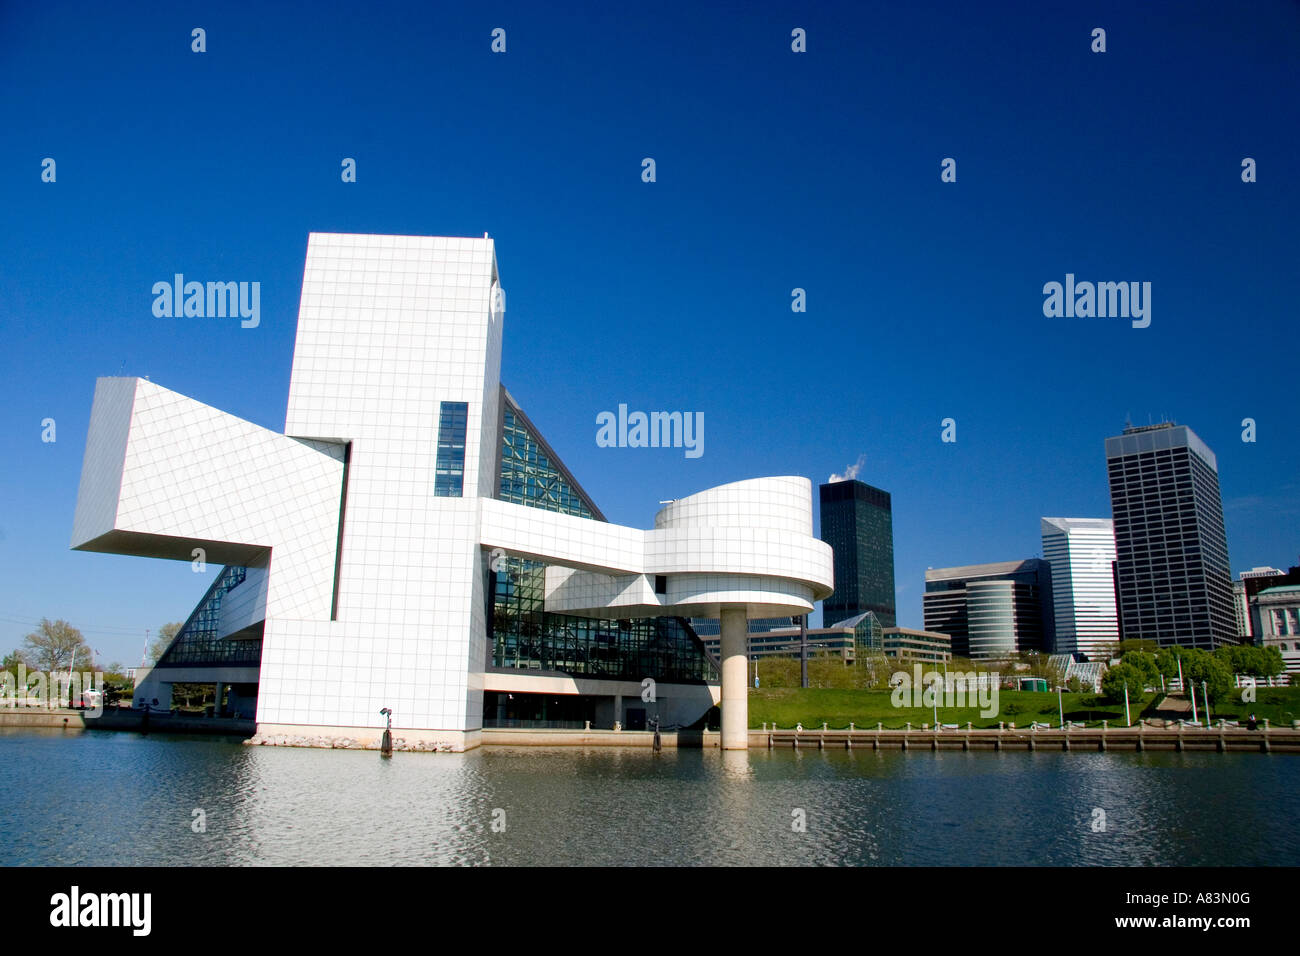 The Rock and Roll Hall of Fame at Cleveland Ohio Stock Photo